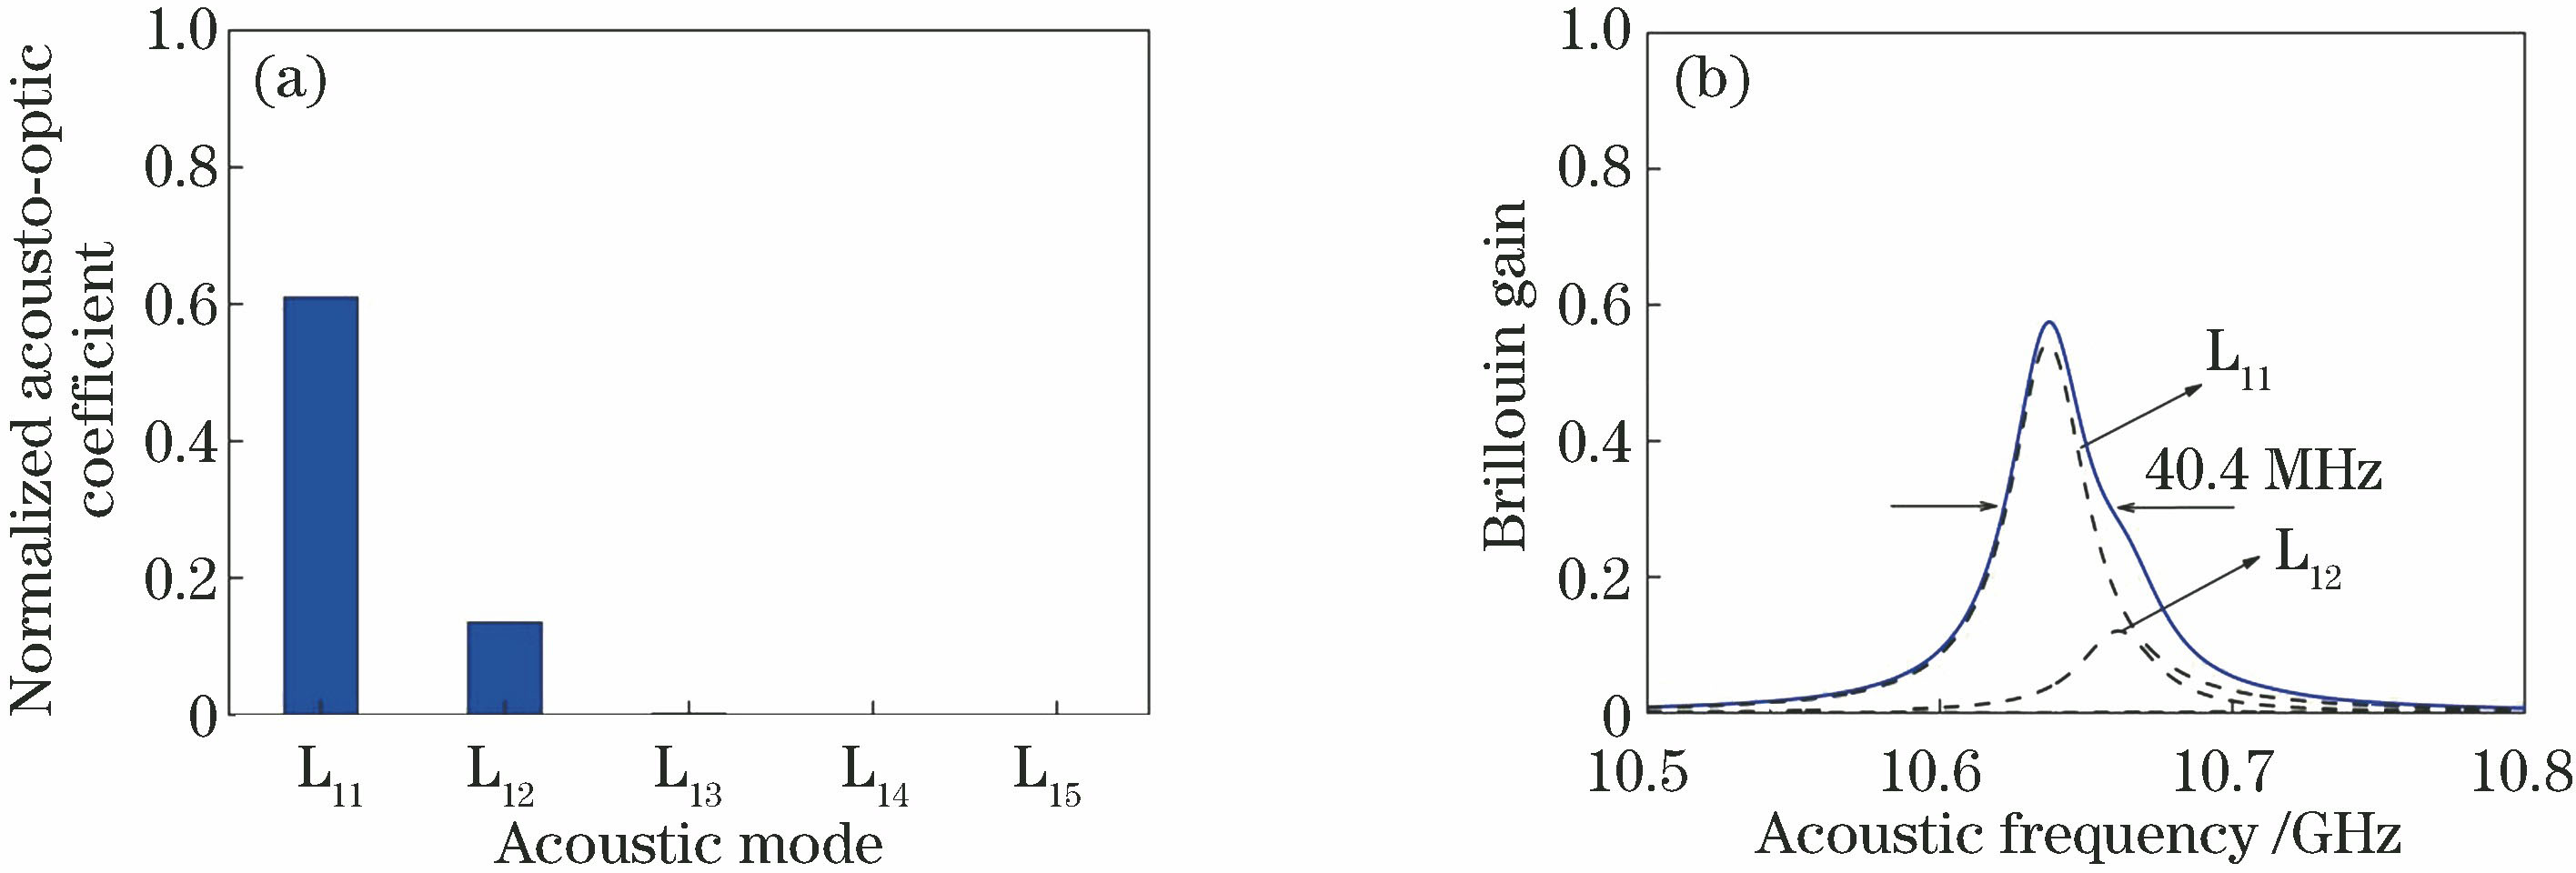 Acousto-optic coefficients and Brillouin gain spectra of LP01-LP11 mode pair. (a) Normalized acousto-optic coefficients; (b) Brillouin gain spectra